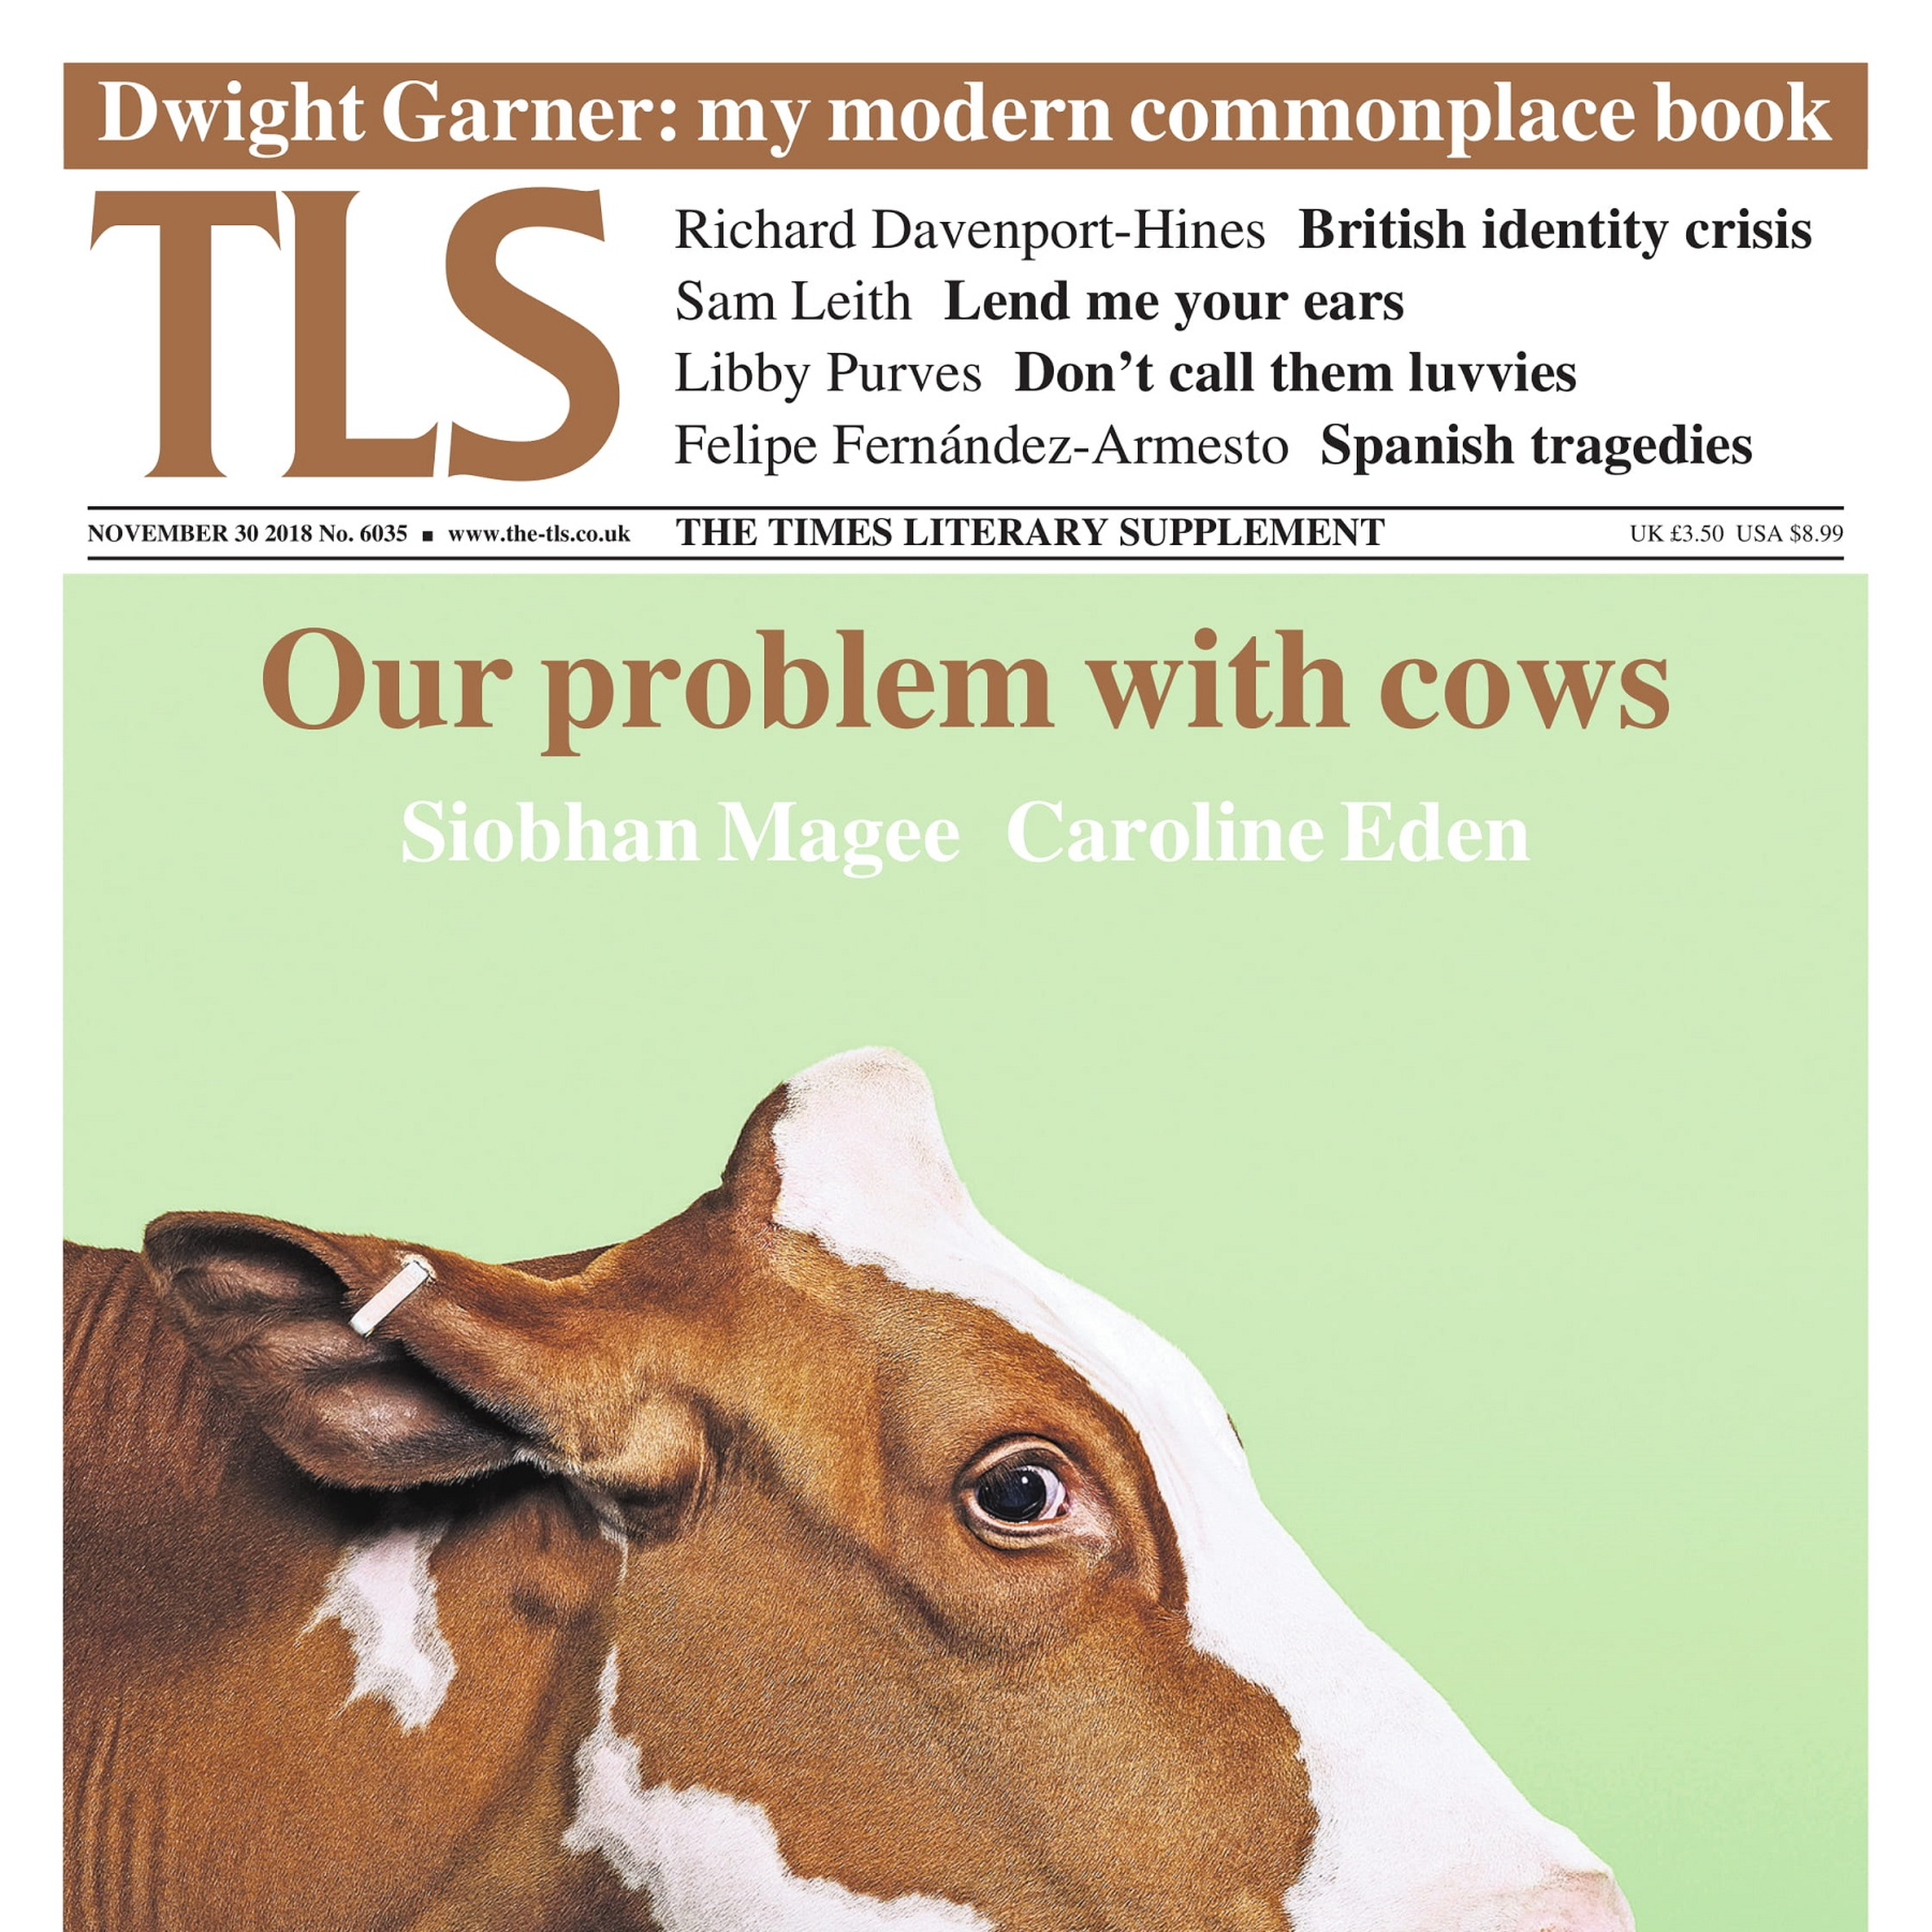 Our problem with cows